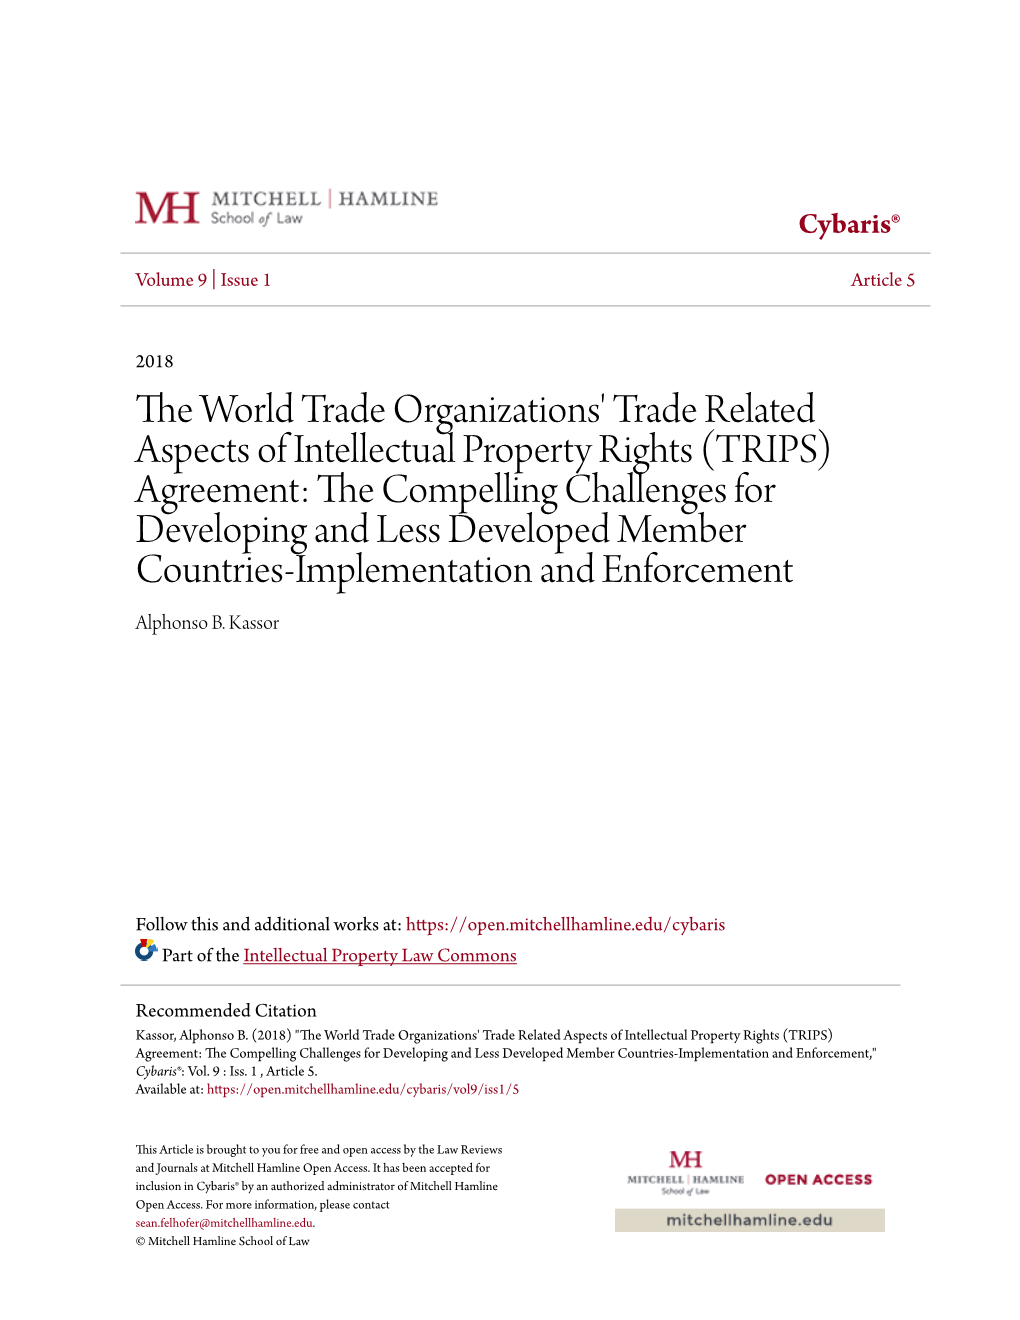 The World Trade Organizations' Trade Related Aspects of Intellectual